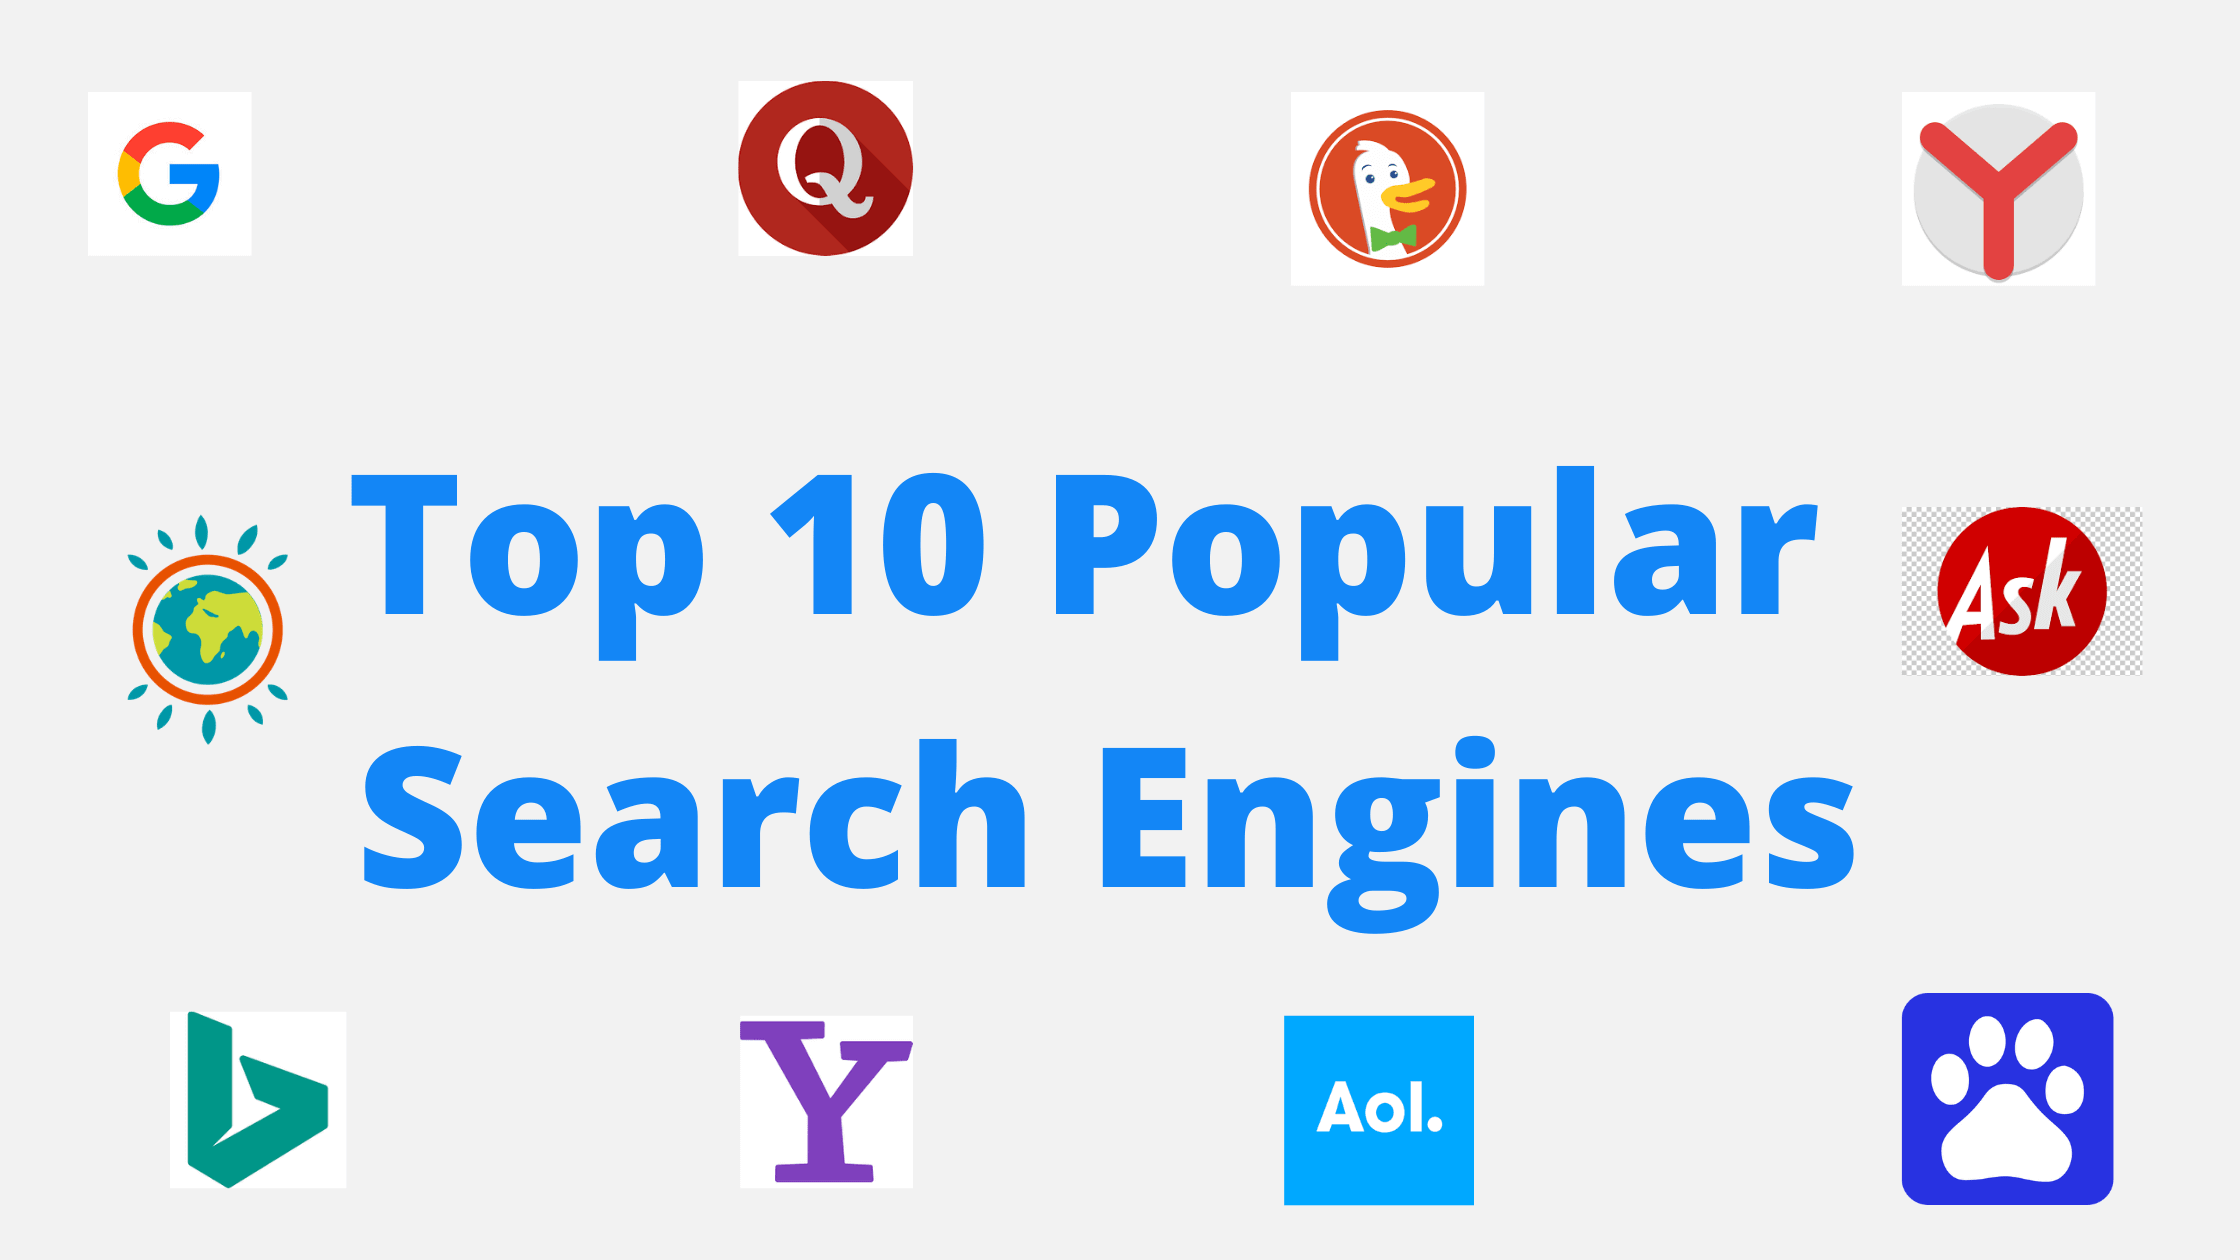 Top 10 Popular Search Engines